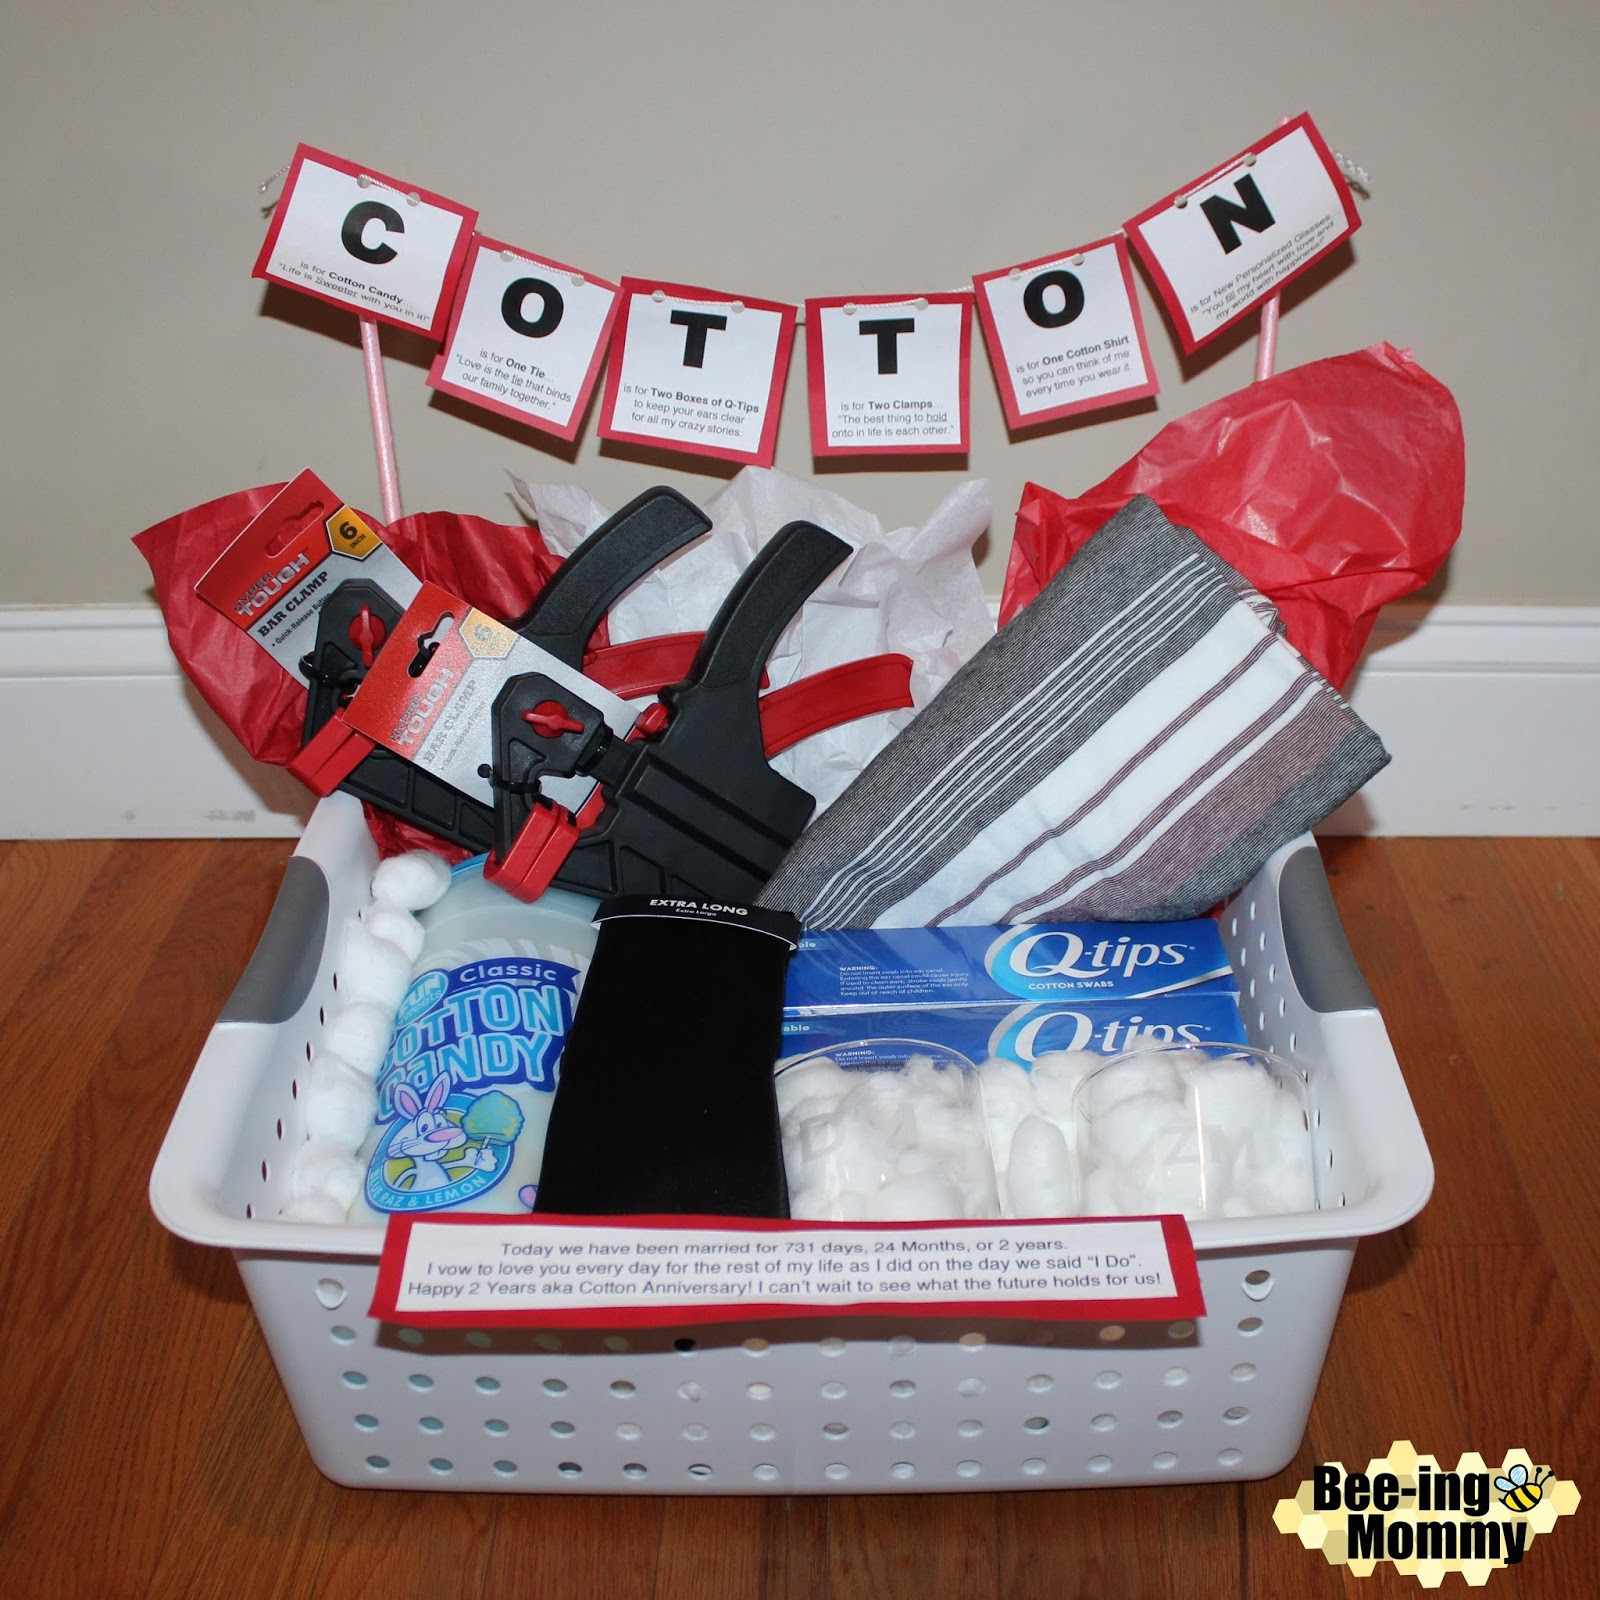 2Nd Year Anniversary Gift Ideas For Husband
 Cotton Anniversary Gift Basket plus several more t